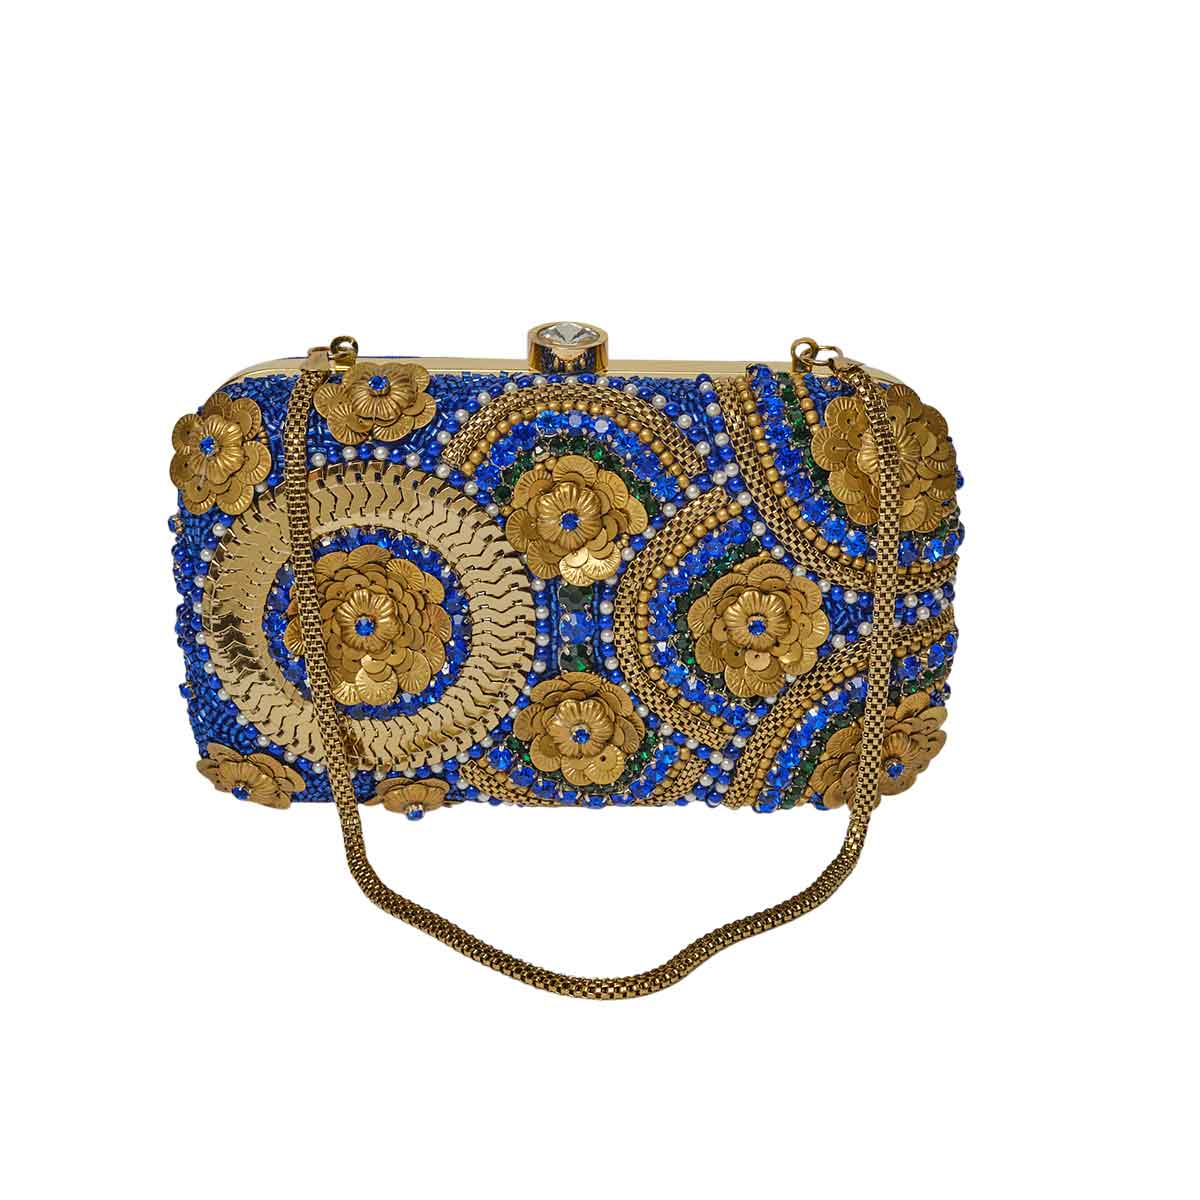 Blue and gold clutch handbag, with big stone lock and detailed chain shoulder strap. Aelia Clutch from Rani Collection by Veronica Tharmalingam